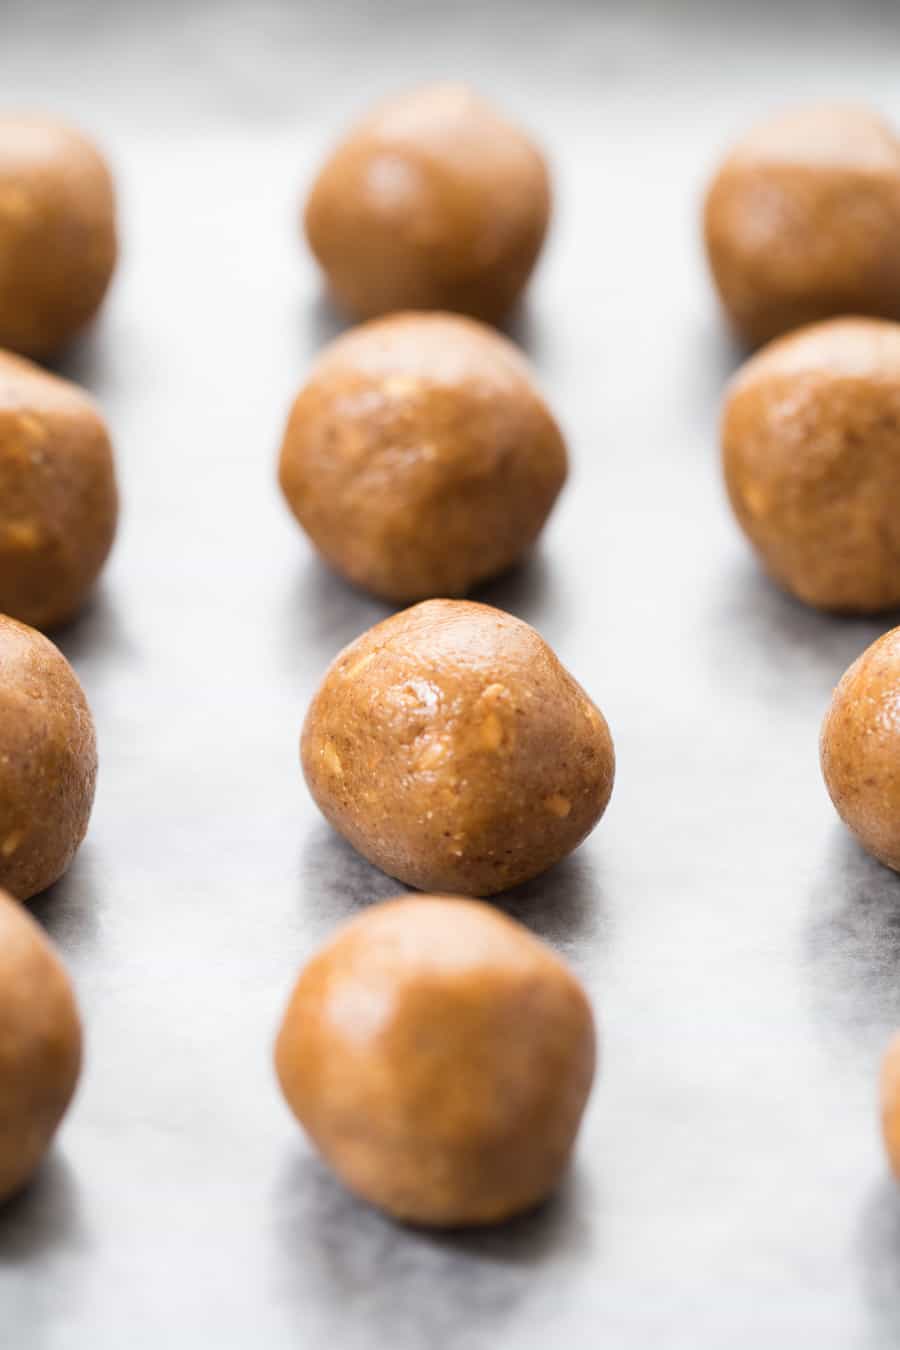 ALMOND BUTTER TRUFFLES made with just 4 ingredients: almond butter, maple syrup, coconut flour and chocolate!